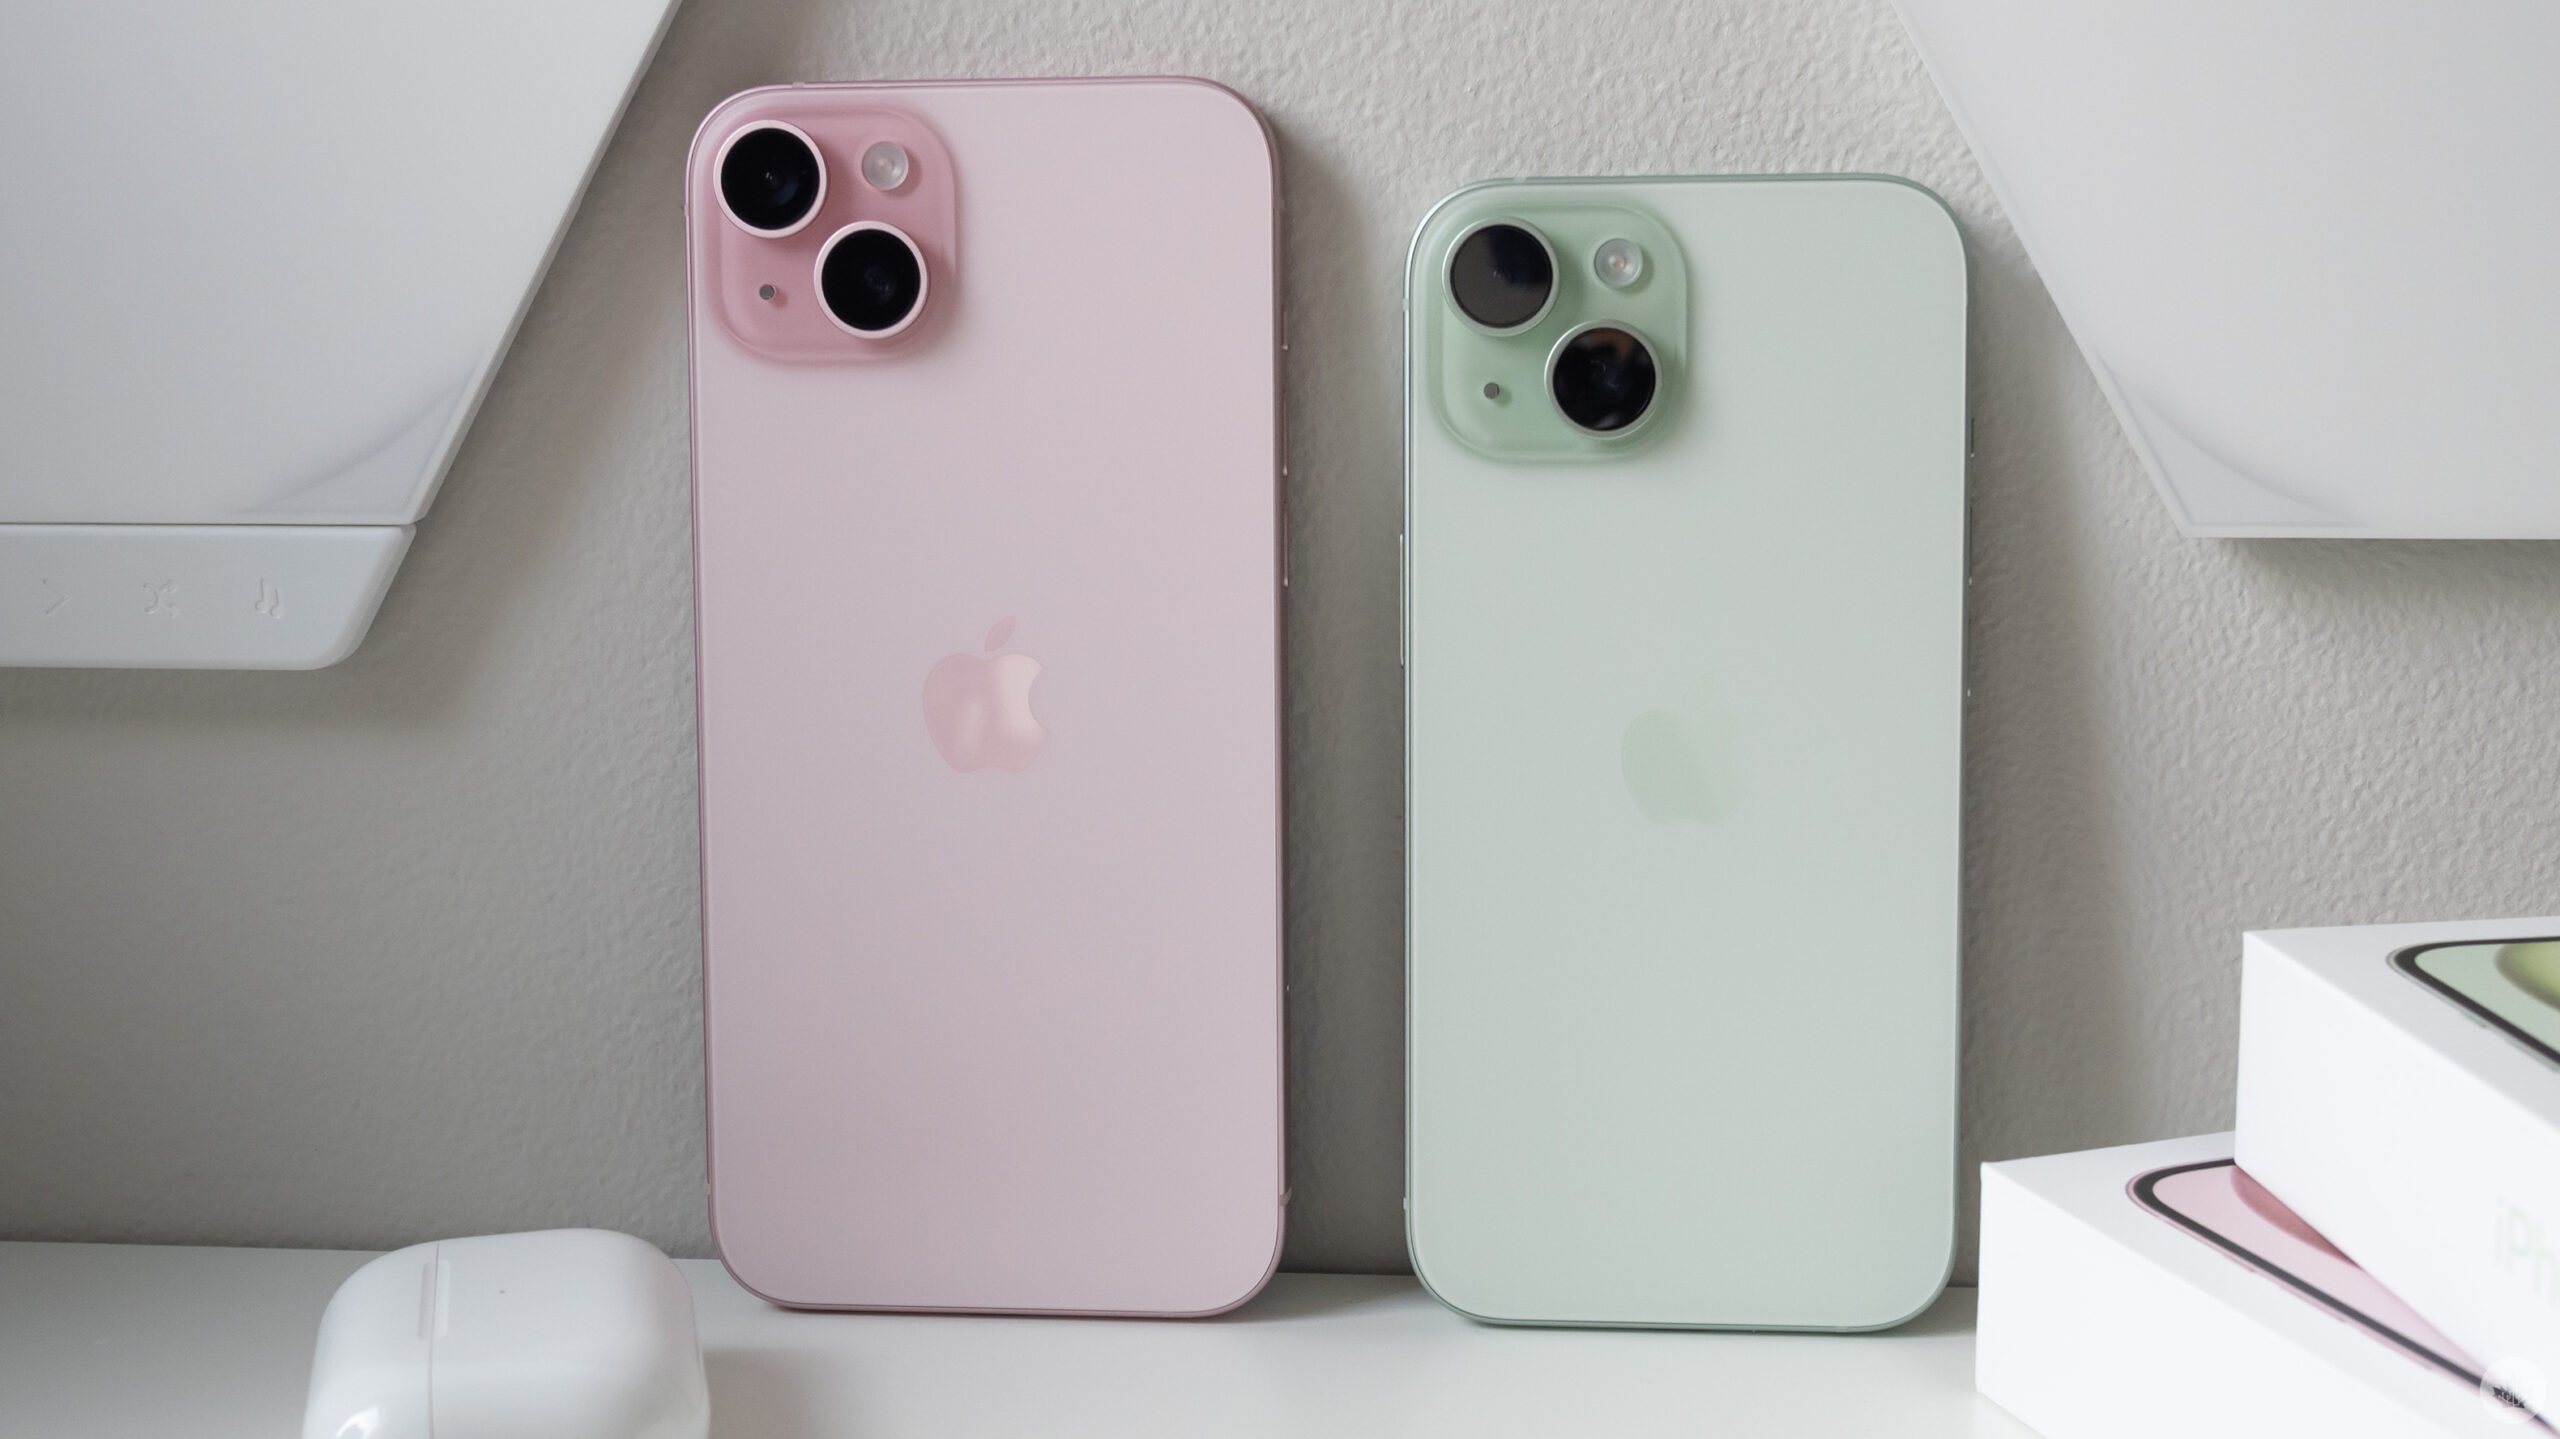 iPhone 15 and iPhone 15 Plus